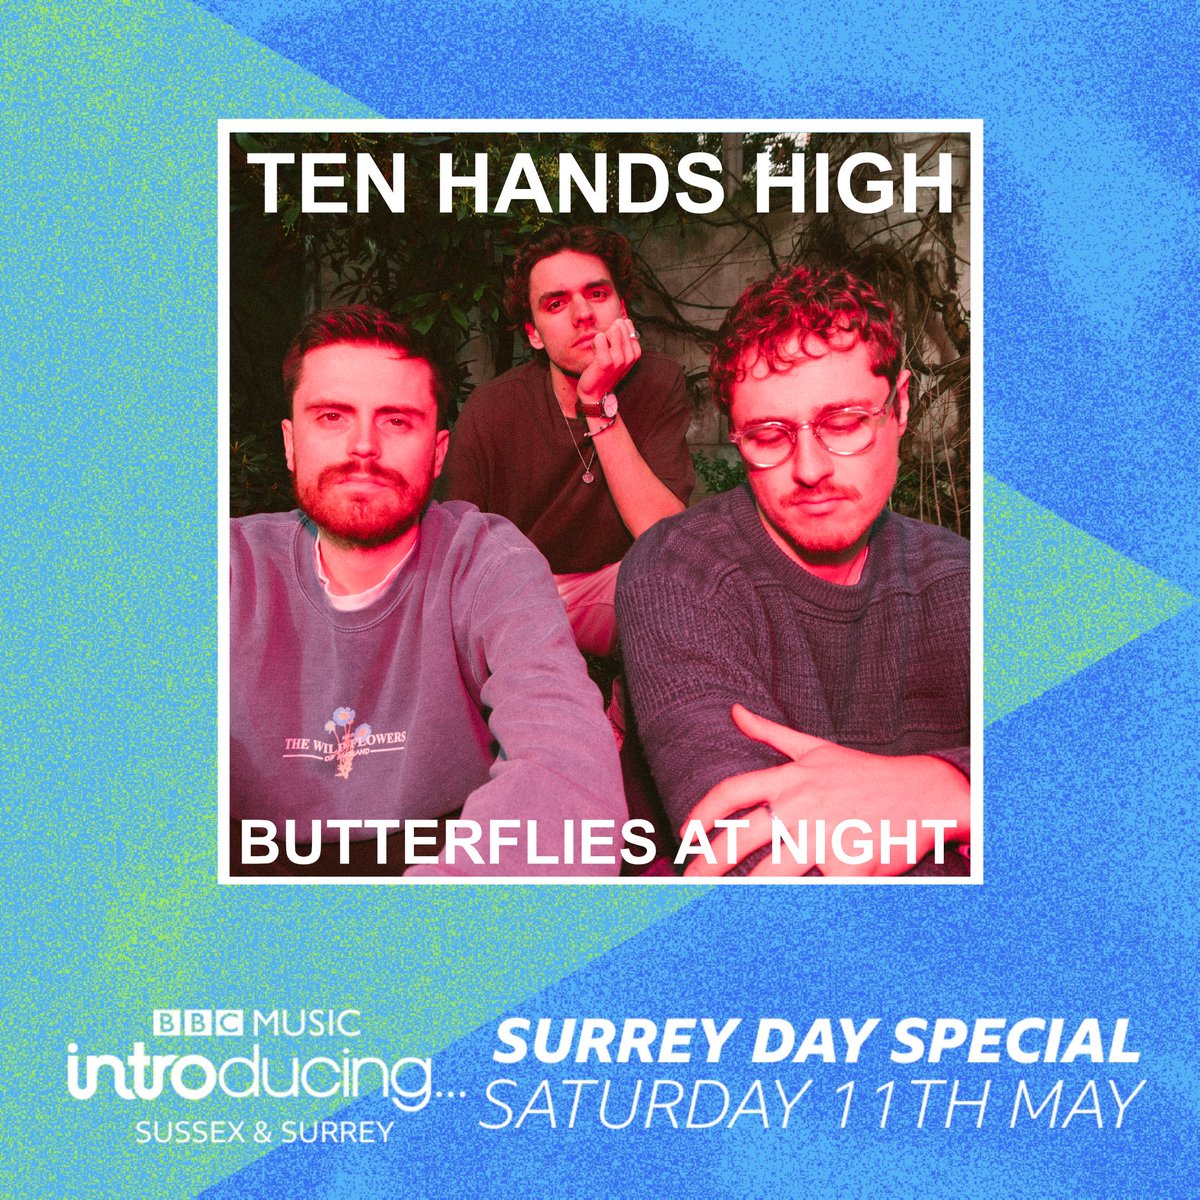 We’re on the airwaves again! The lovely @MelitaRadio has chosen Butterflies at Night as one of her @bbcintroducing tracks for Surrey Day today ☺️ Hear it on @BBCSurrey at around 2:30pm with @jamescannon 🎧